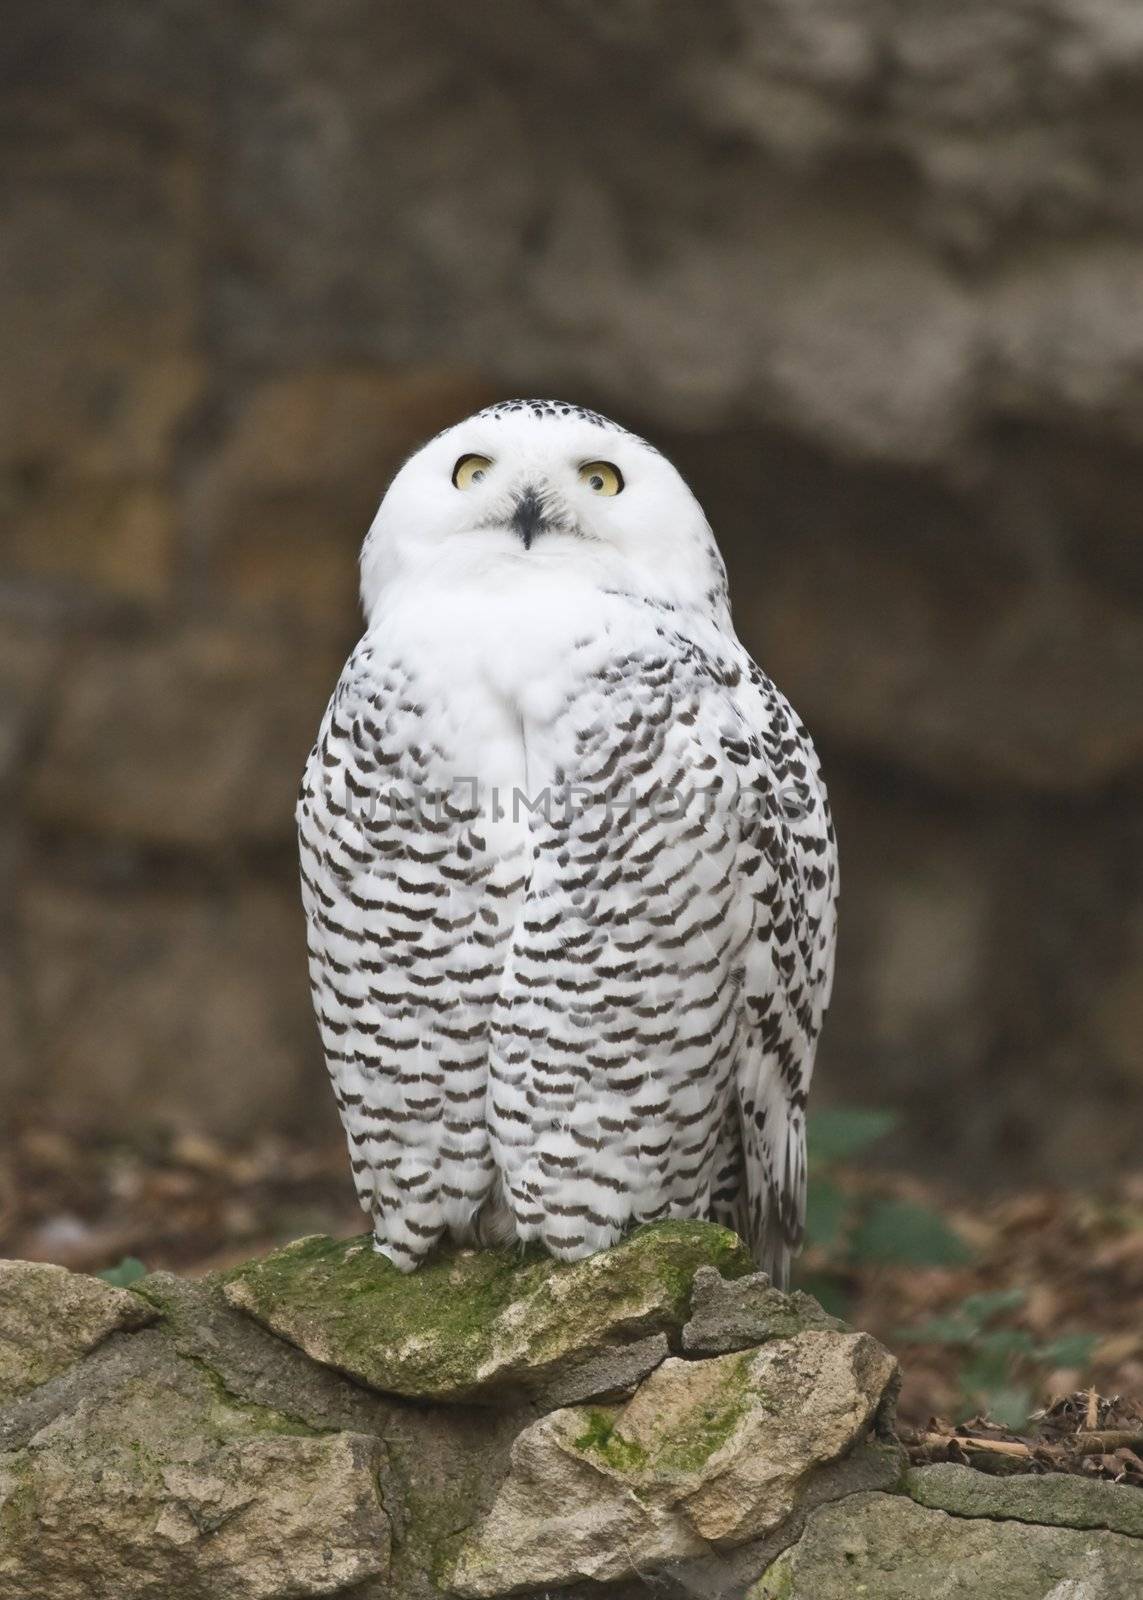 The snowy owl (Nyctea scandiaca) in the Moscow zoo